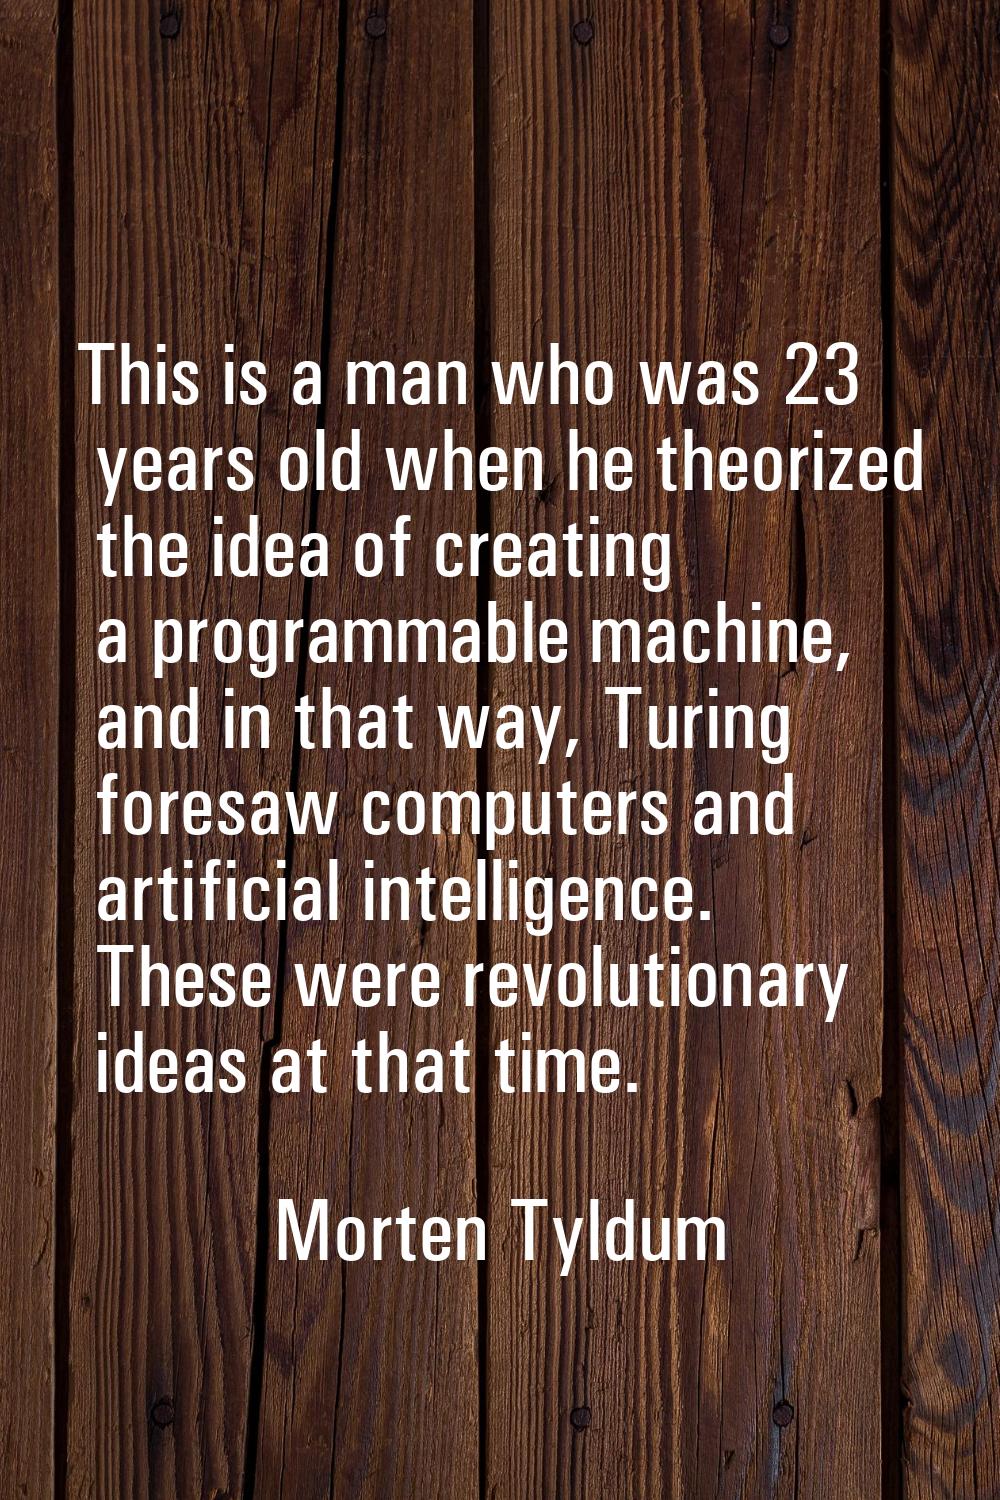 This is a man who was 23 years old when he theorized the idea of creating a programmable machine, a